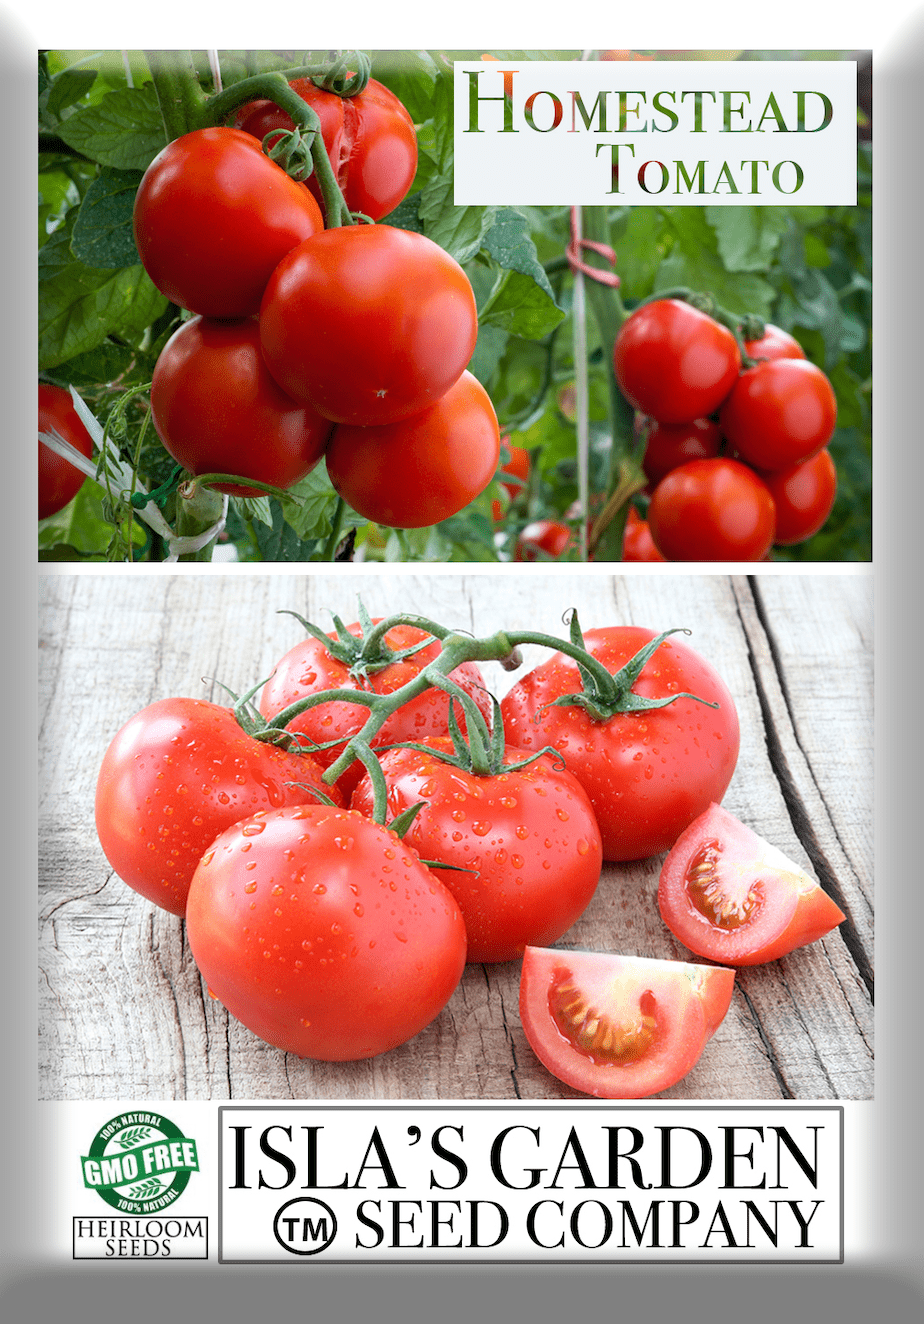 Homestead Heirloom Tomato Seeds, 250 Seeds Per Packet, Non GMO Seeds